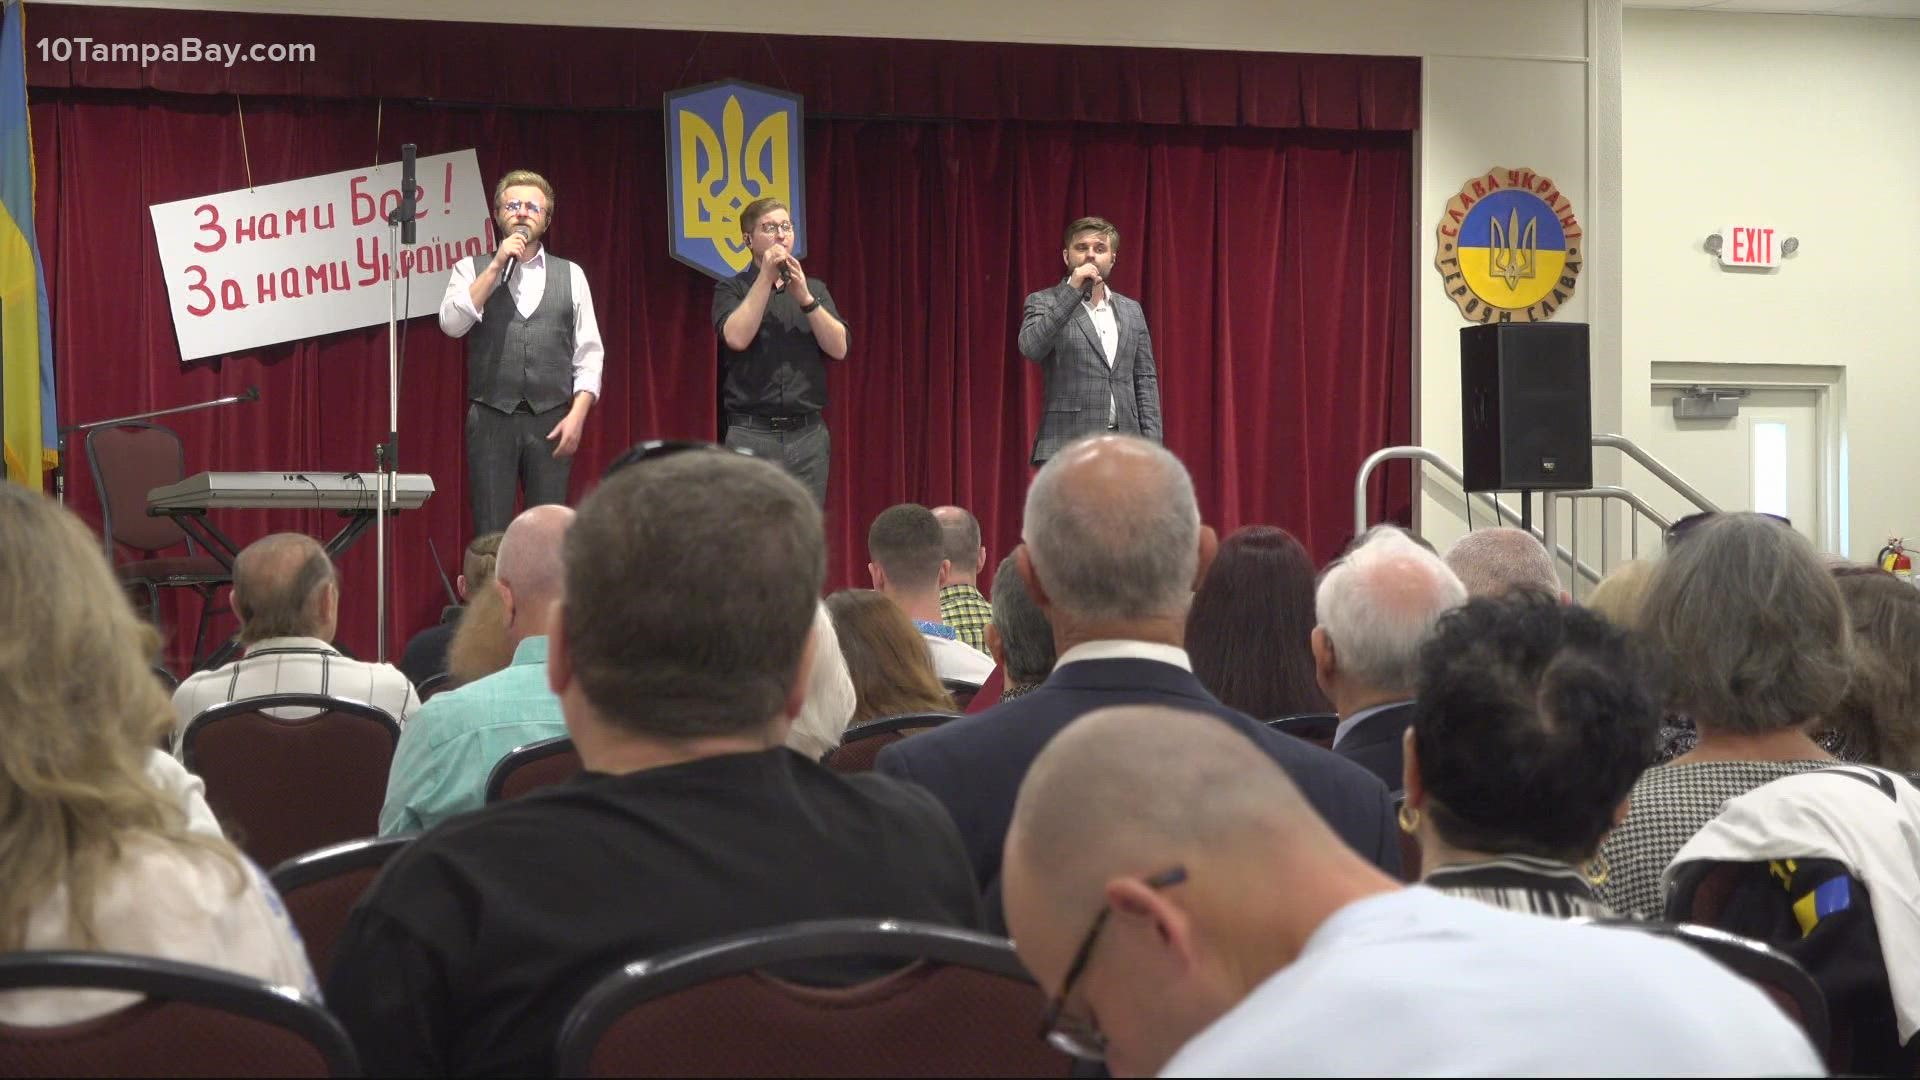 "Revived Soldiers Ukraine" held two concerts in St. Petersburg and North Port over the weekend.